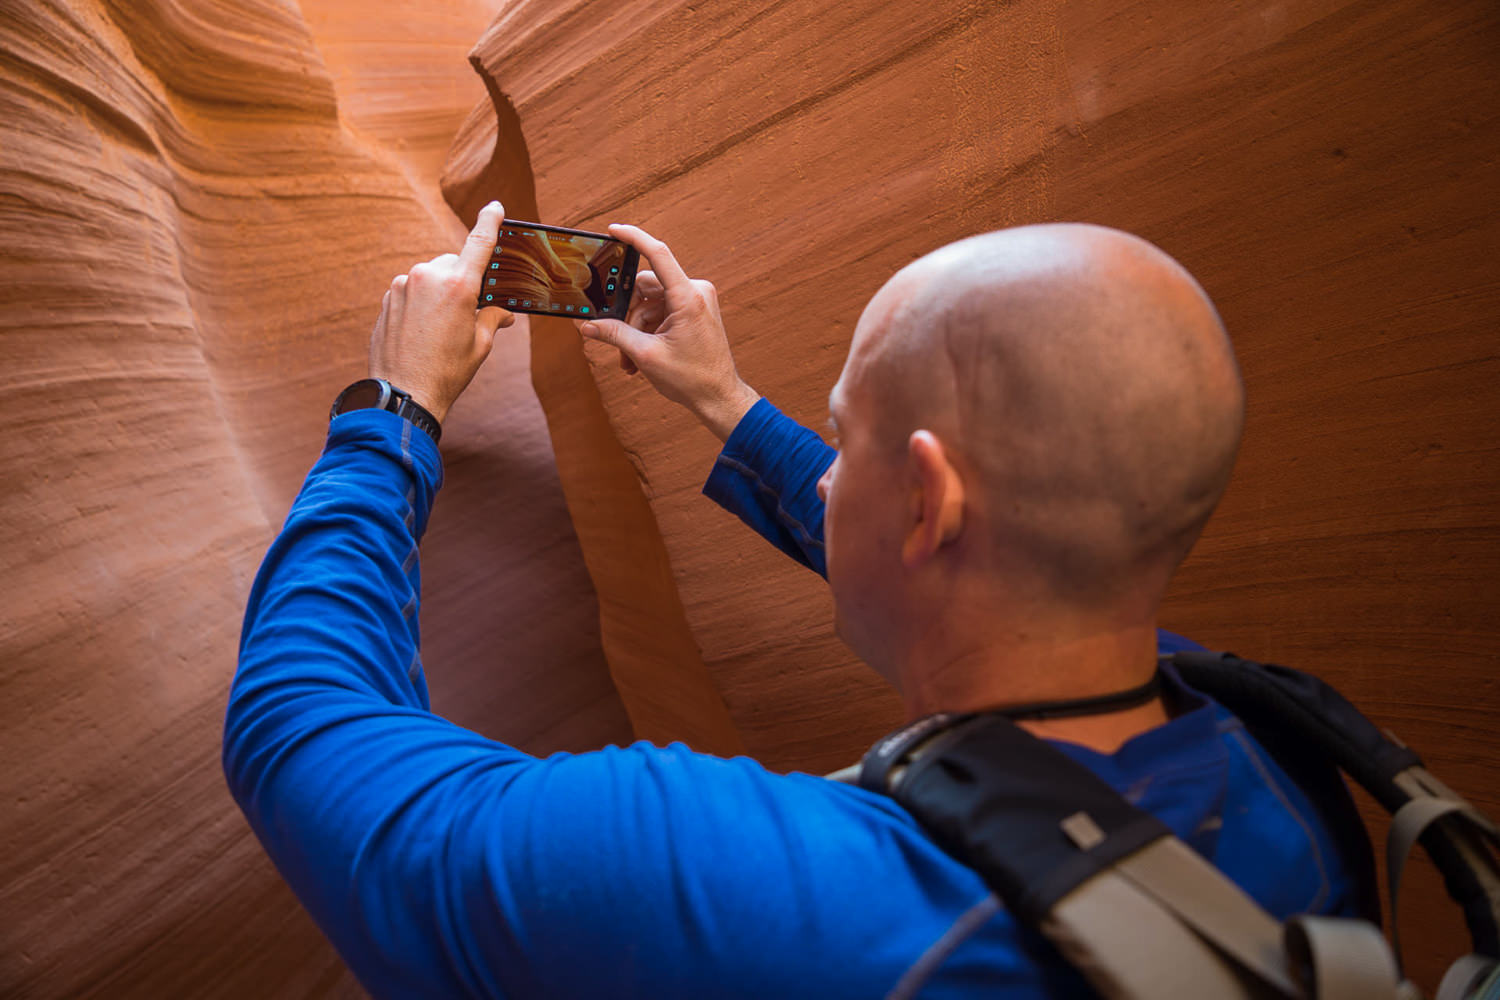 Me using the G4 in some Slot Canyons in Arizona - Photo Credit: Brian Matiash